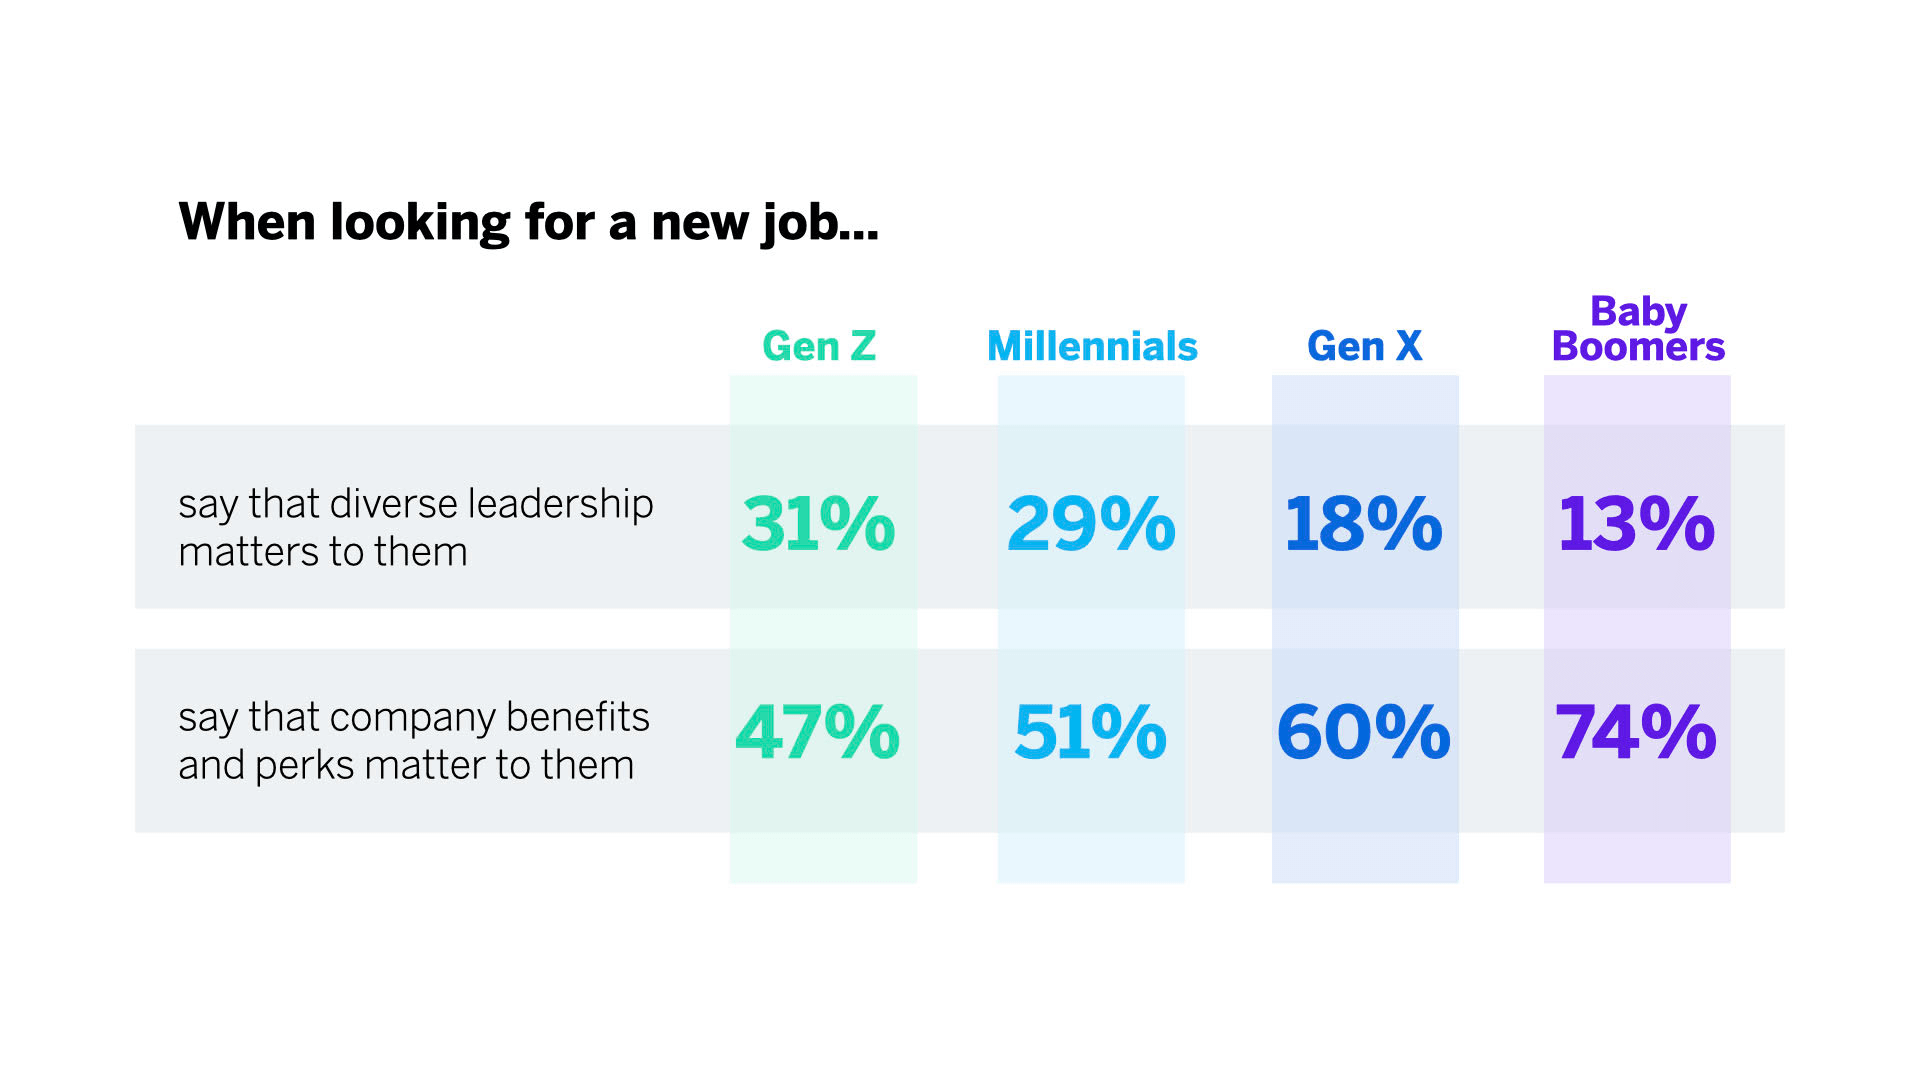 What different people say matters to them when looking for a new job.